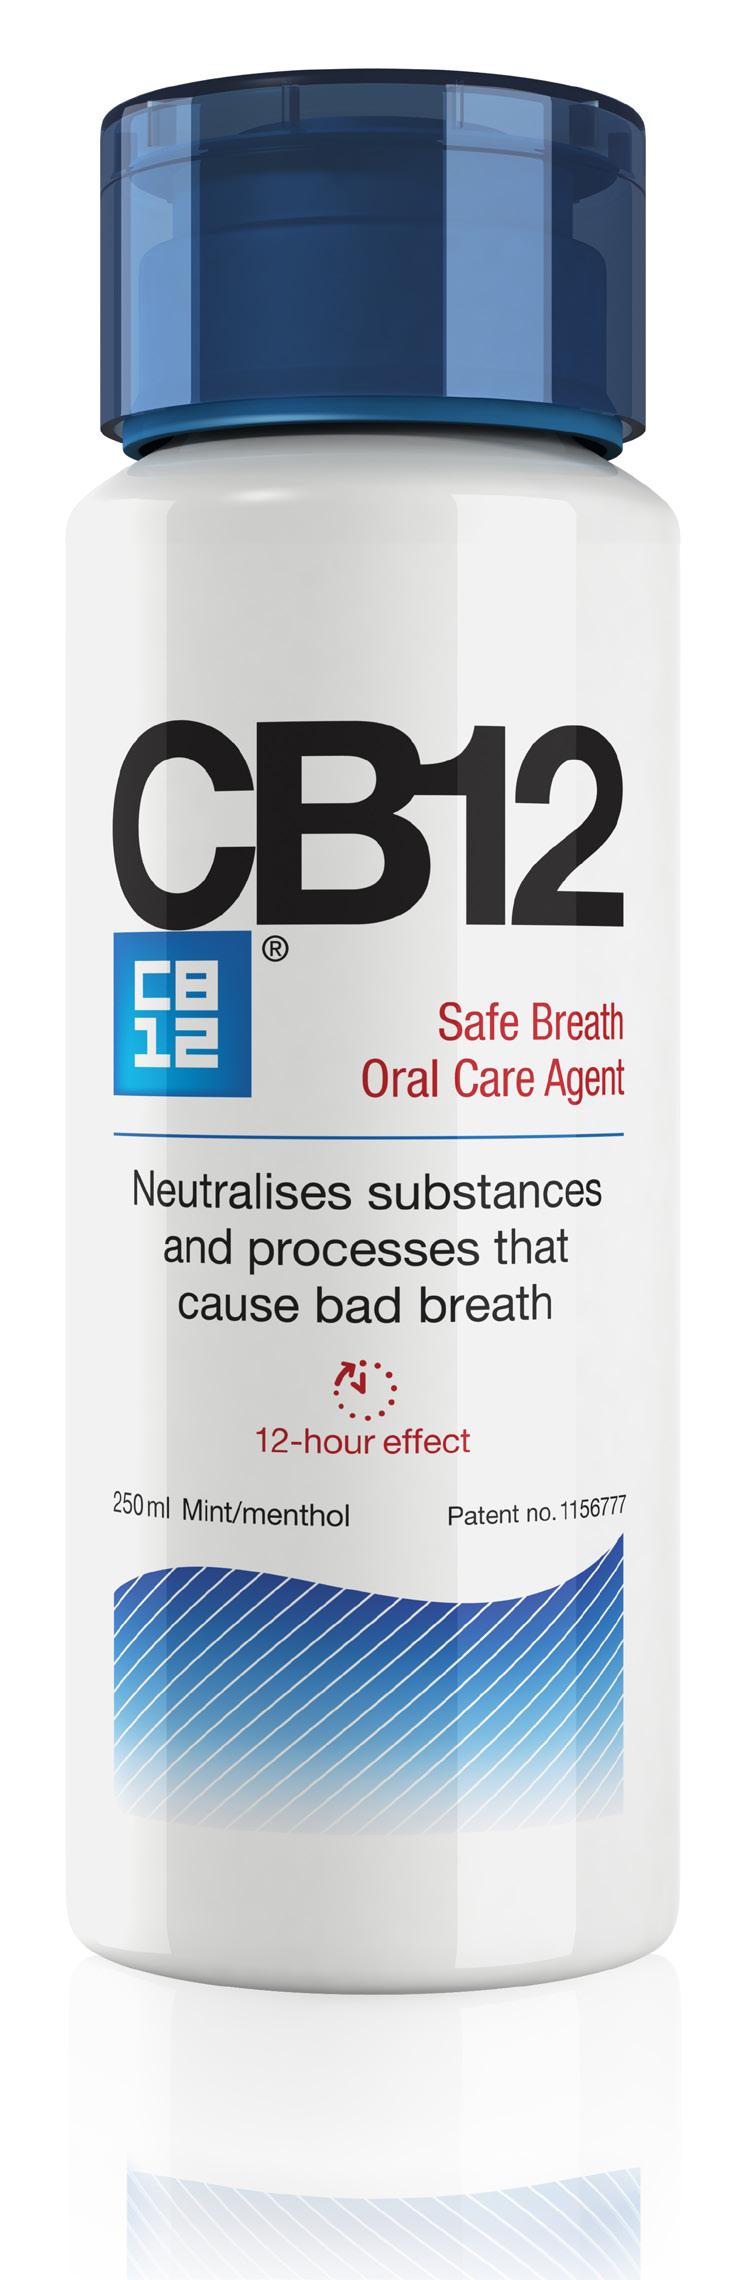 CB12 prevents bad breath CB12 is a patented product that neutralises and prevents the formation of the substances that cause bad breath.